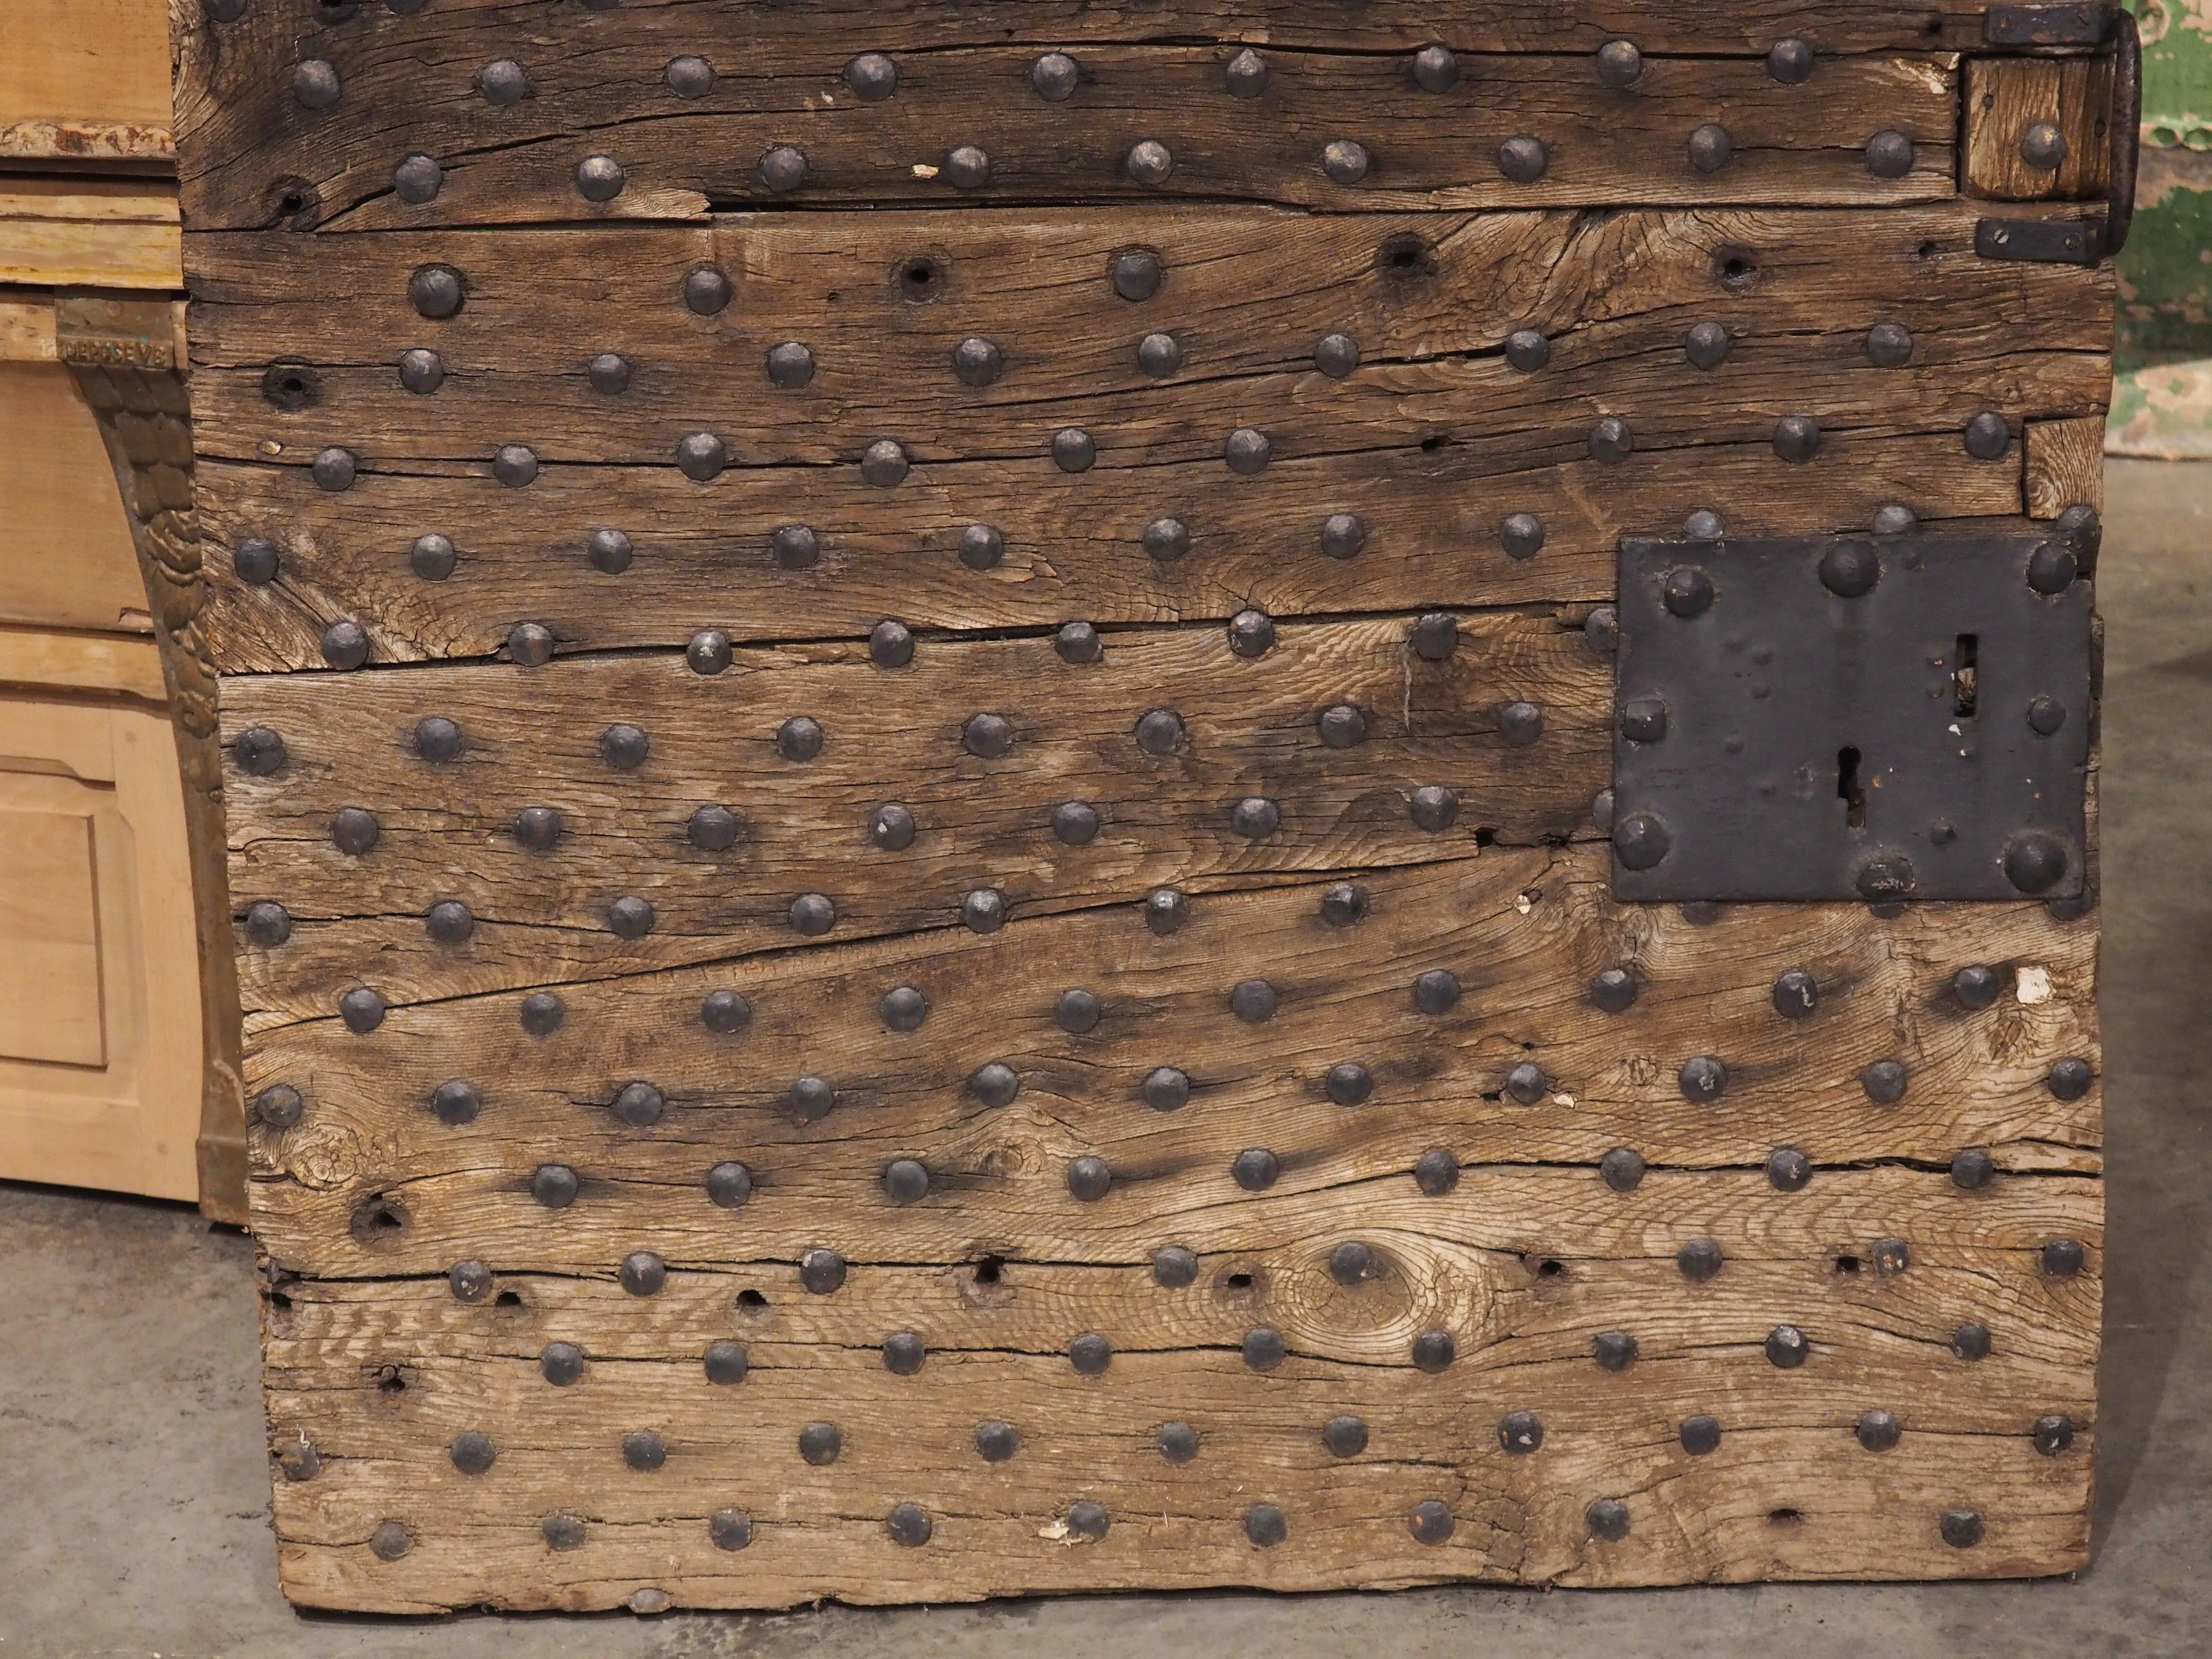 Taken from a prison in Romans-Sur-Isere, France, this porte cachot (dungeon door) has an exterior façade that is embellished with hundreds of iron nailheads arranged in 32 rows. The three inch thick door was hand-carved in the 1700s with a square